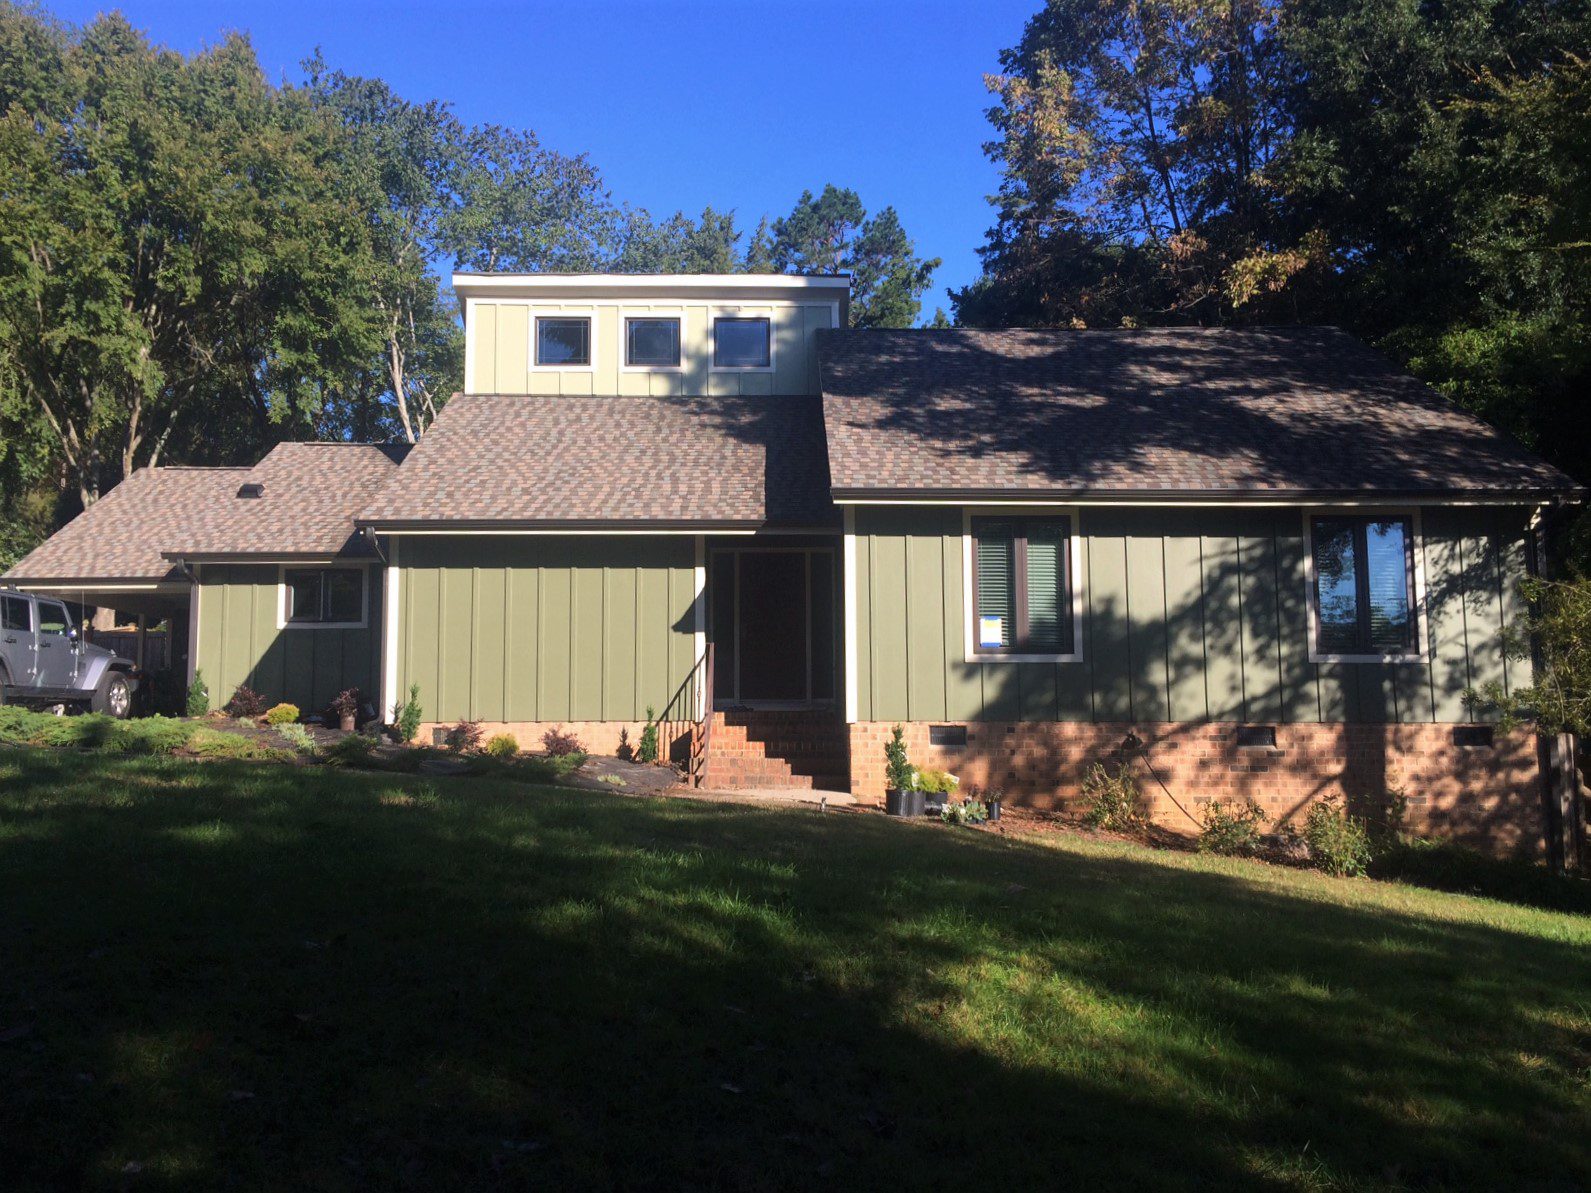 sease home siding, windows and gutter replacement in Charlotte, NC